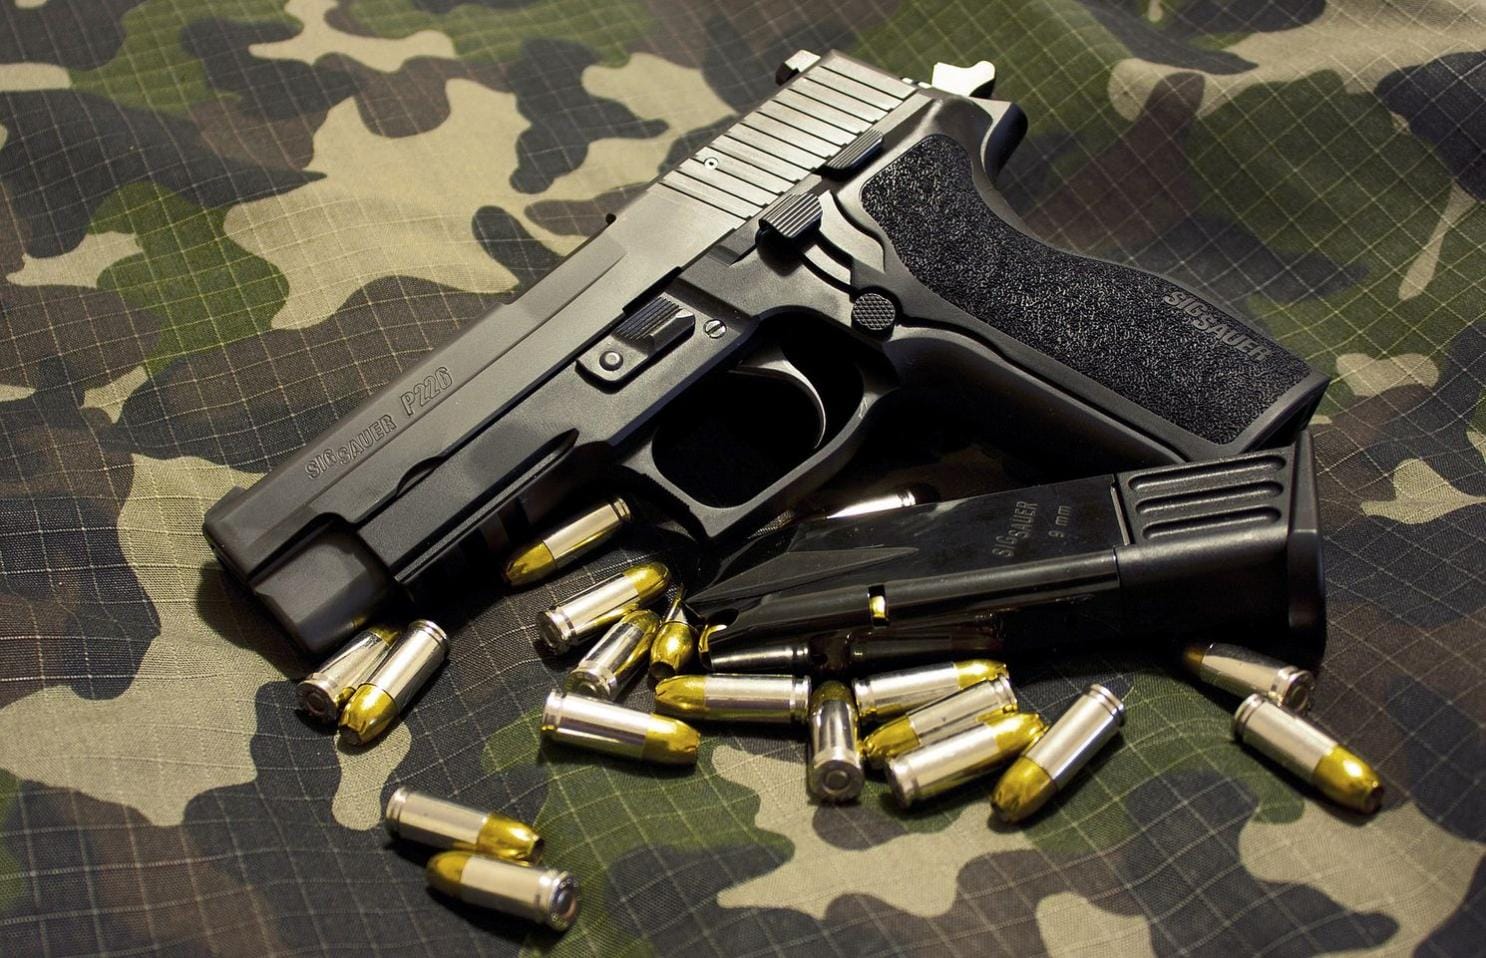 Why Sig Sauer’s P226 Is Still Considered One of the World’s Best